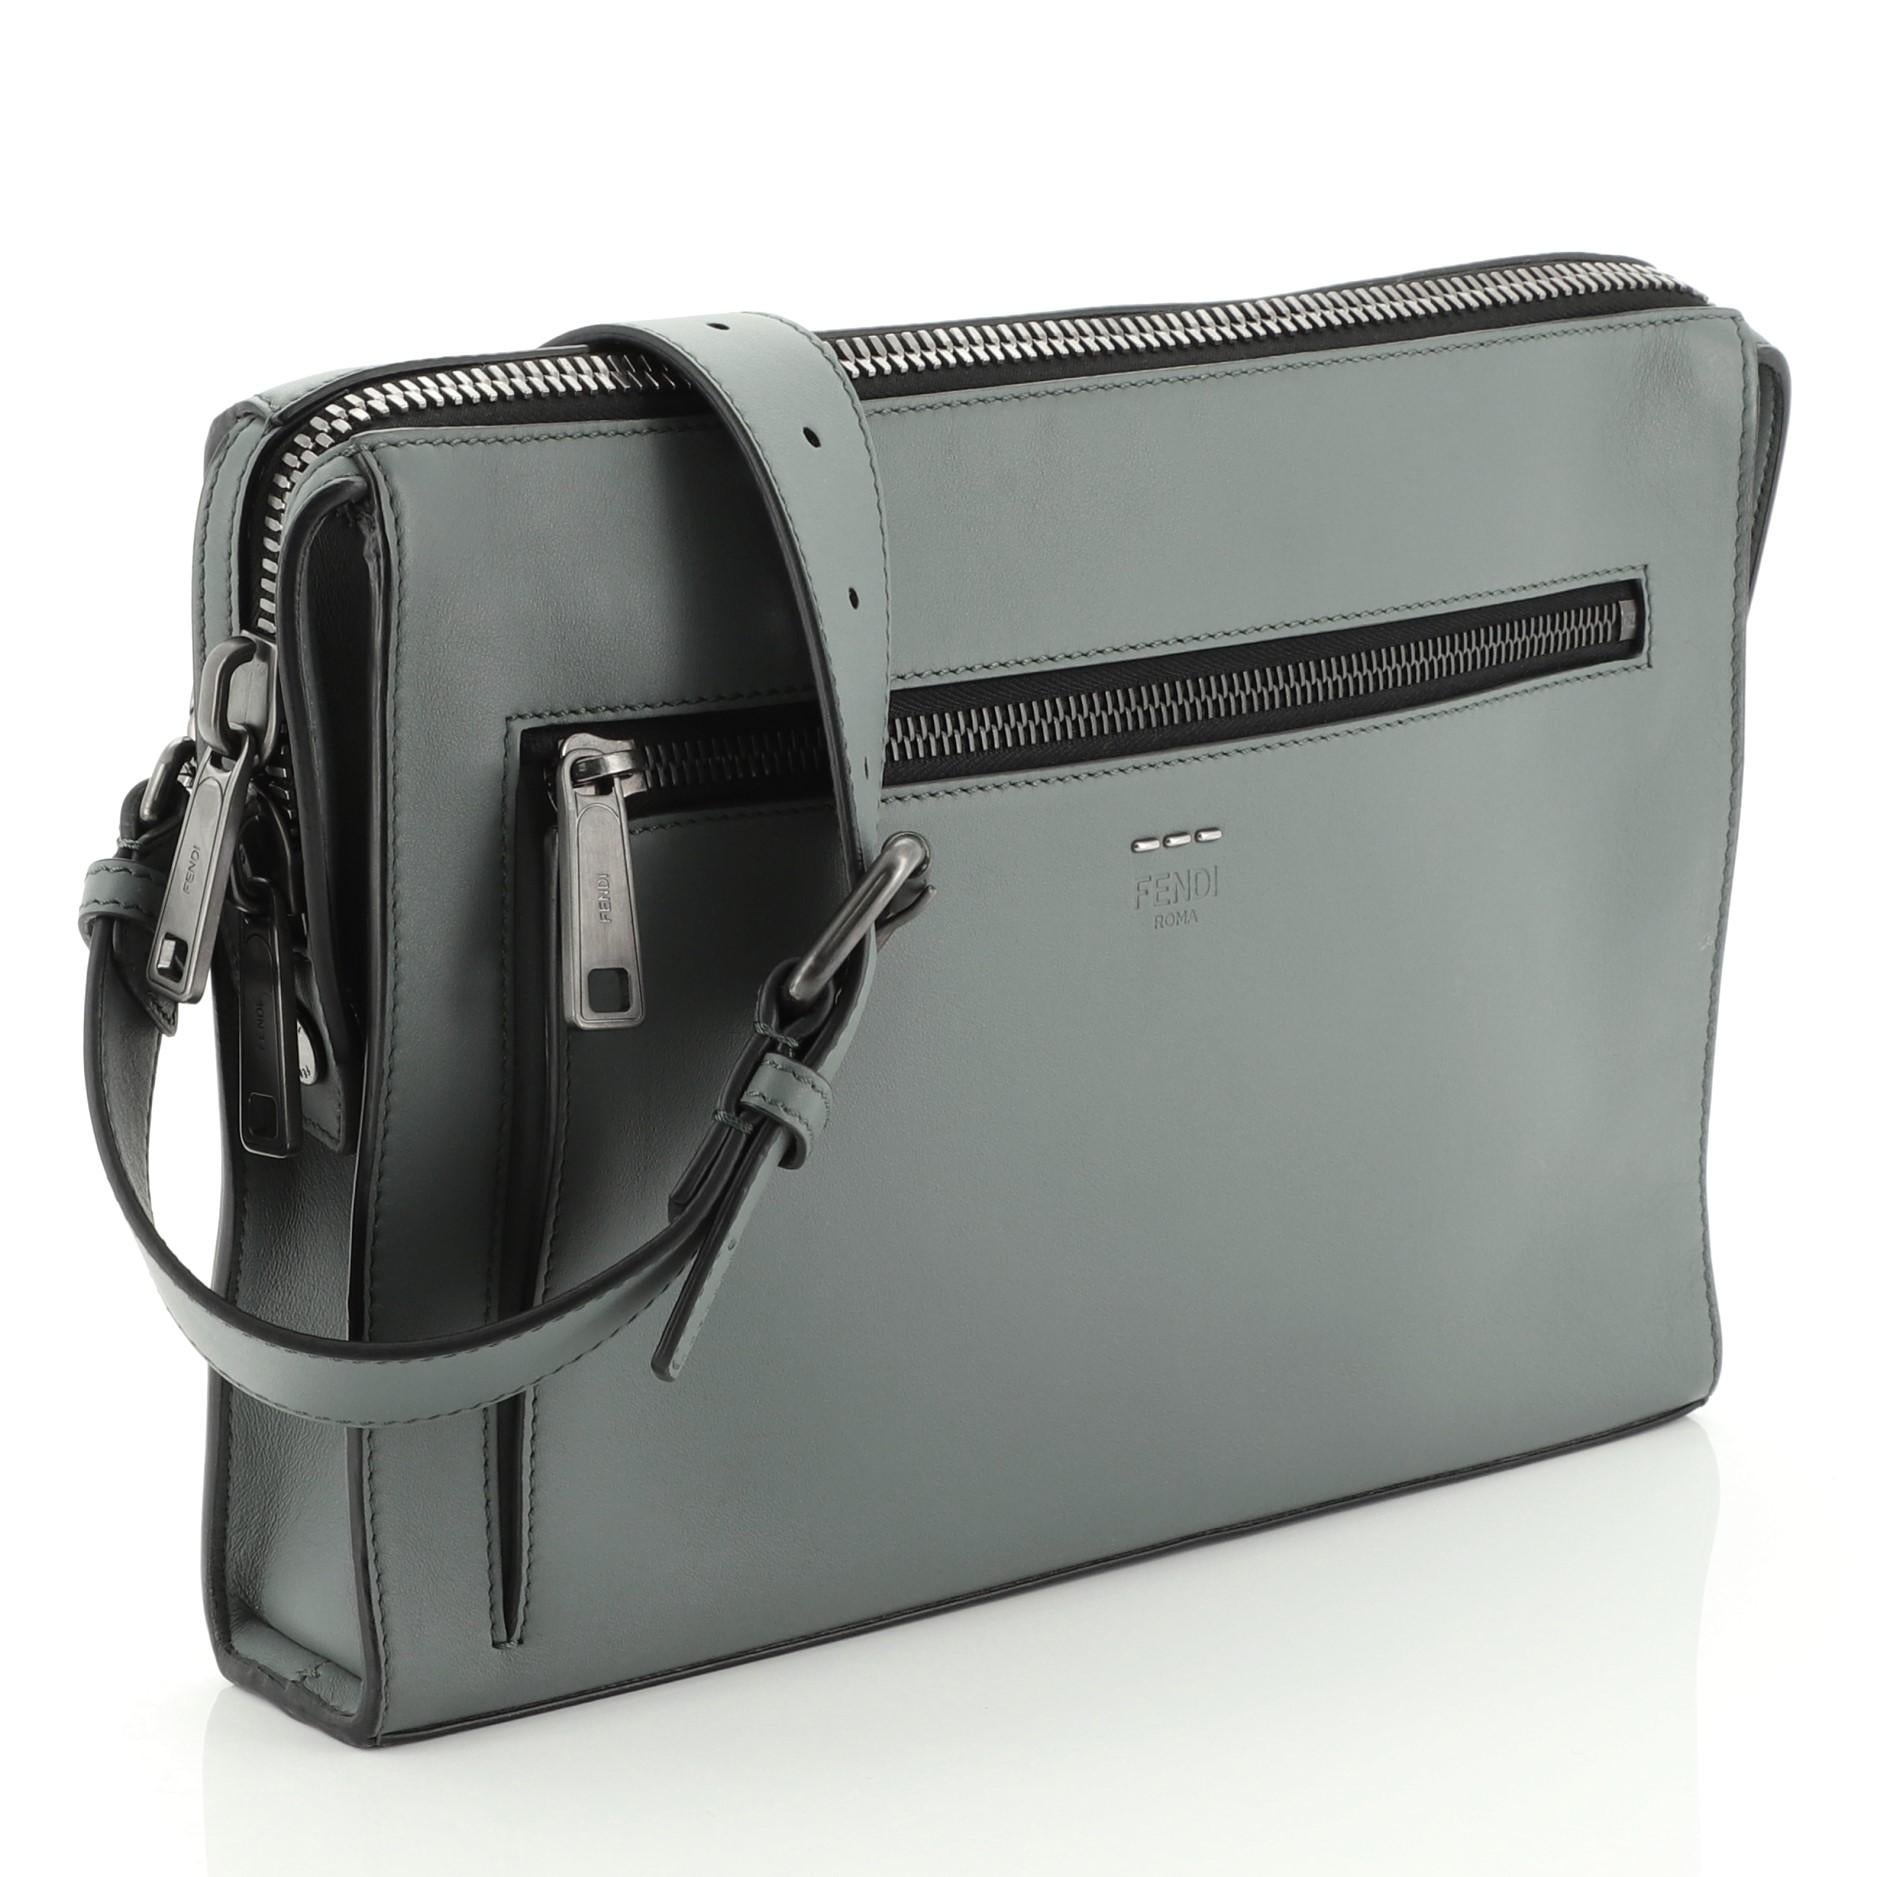 This Fendi Convertible Document Holder Leather Medium, crafted in green leather features an adjustable shoulder strap, exterior front zip pocket and gunmetal-tone hardware. Its zip closure opens to a black fabric interior with zip and slip pockets.